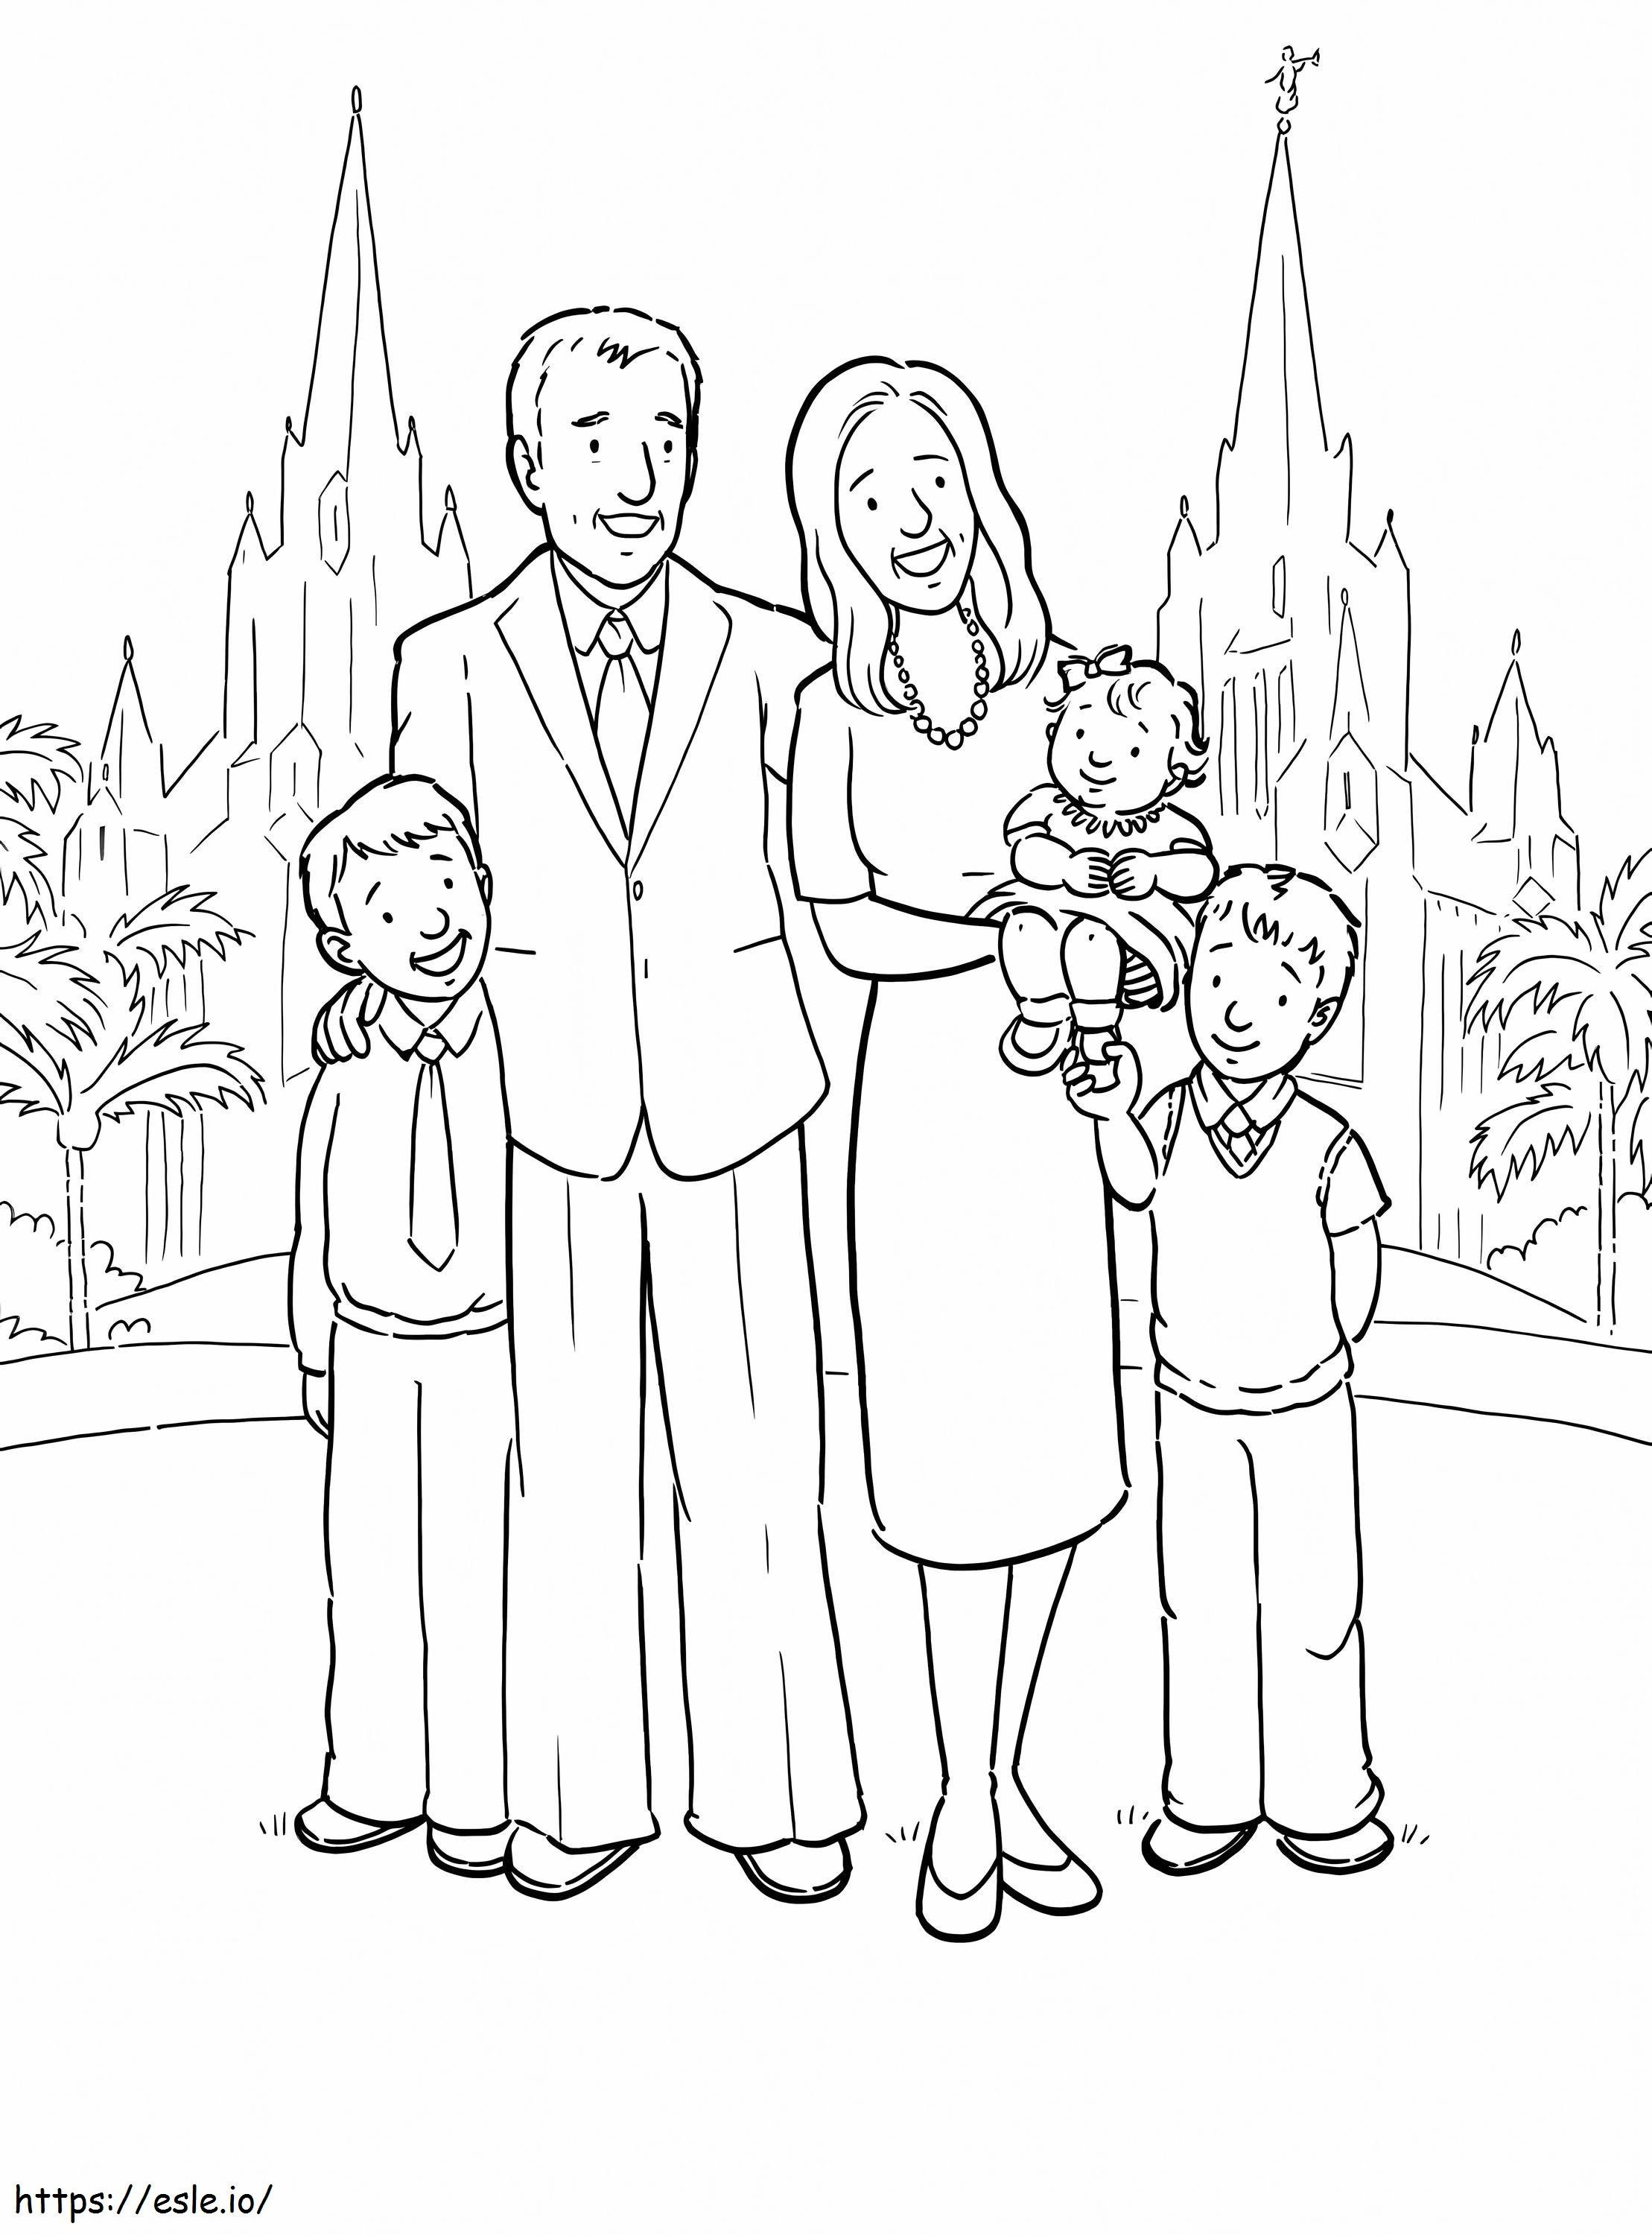 Funny Family coloring page